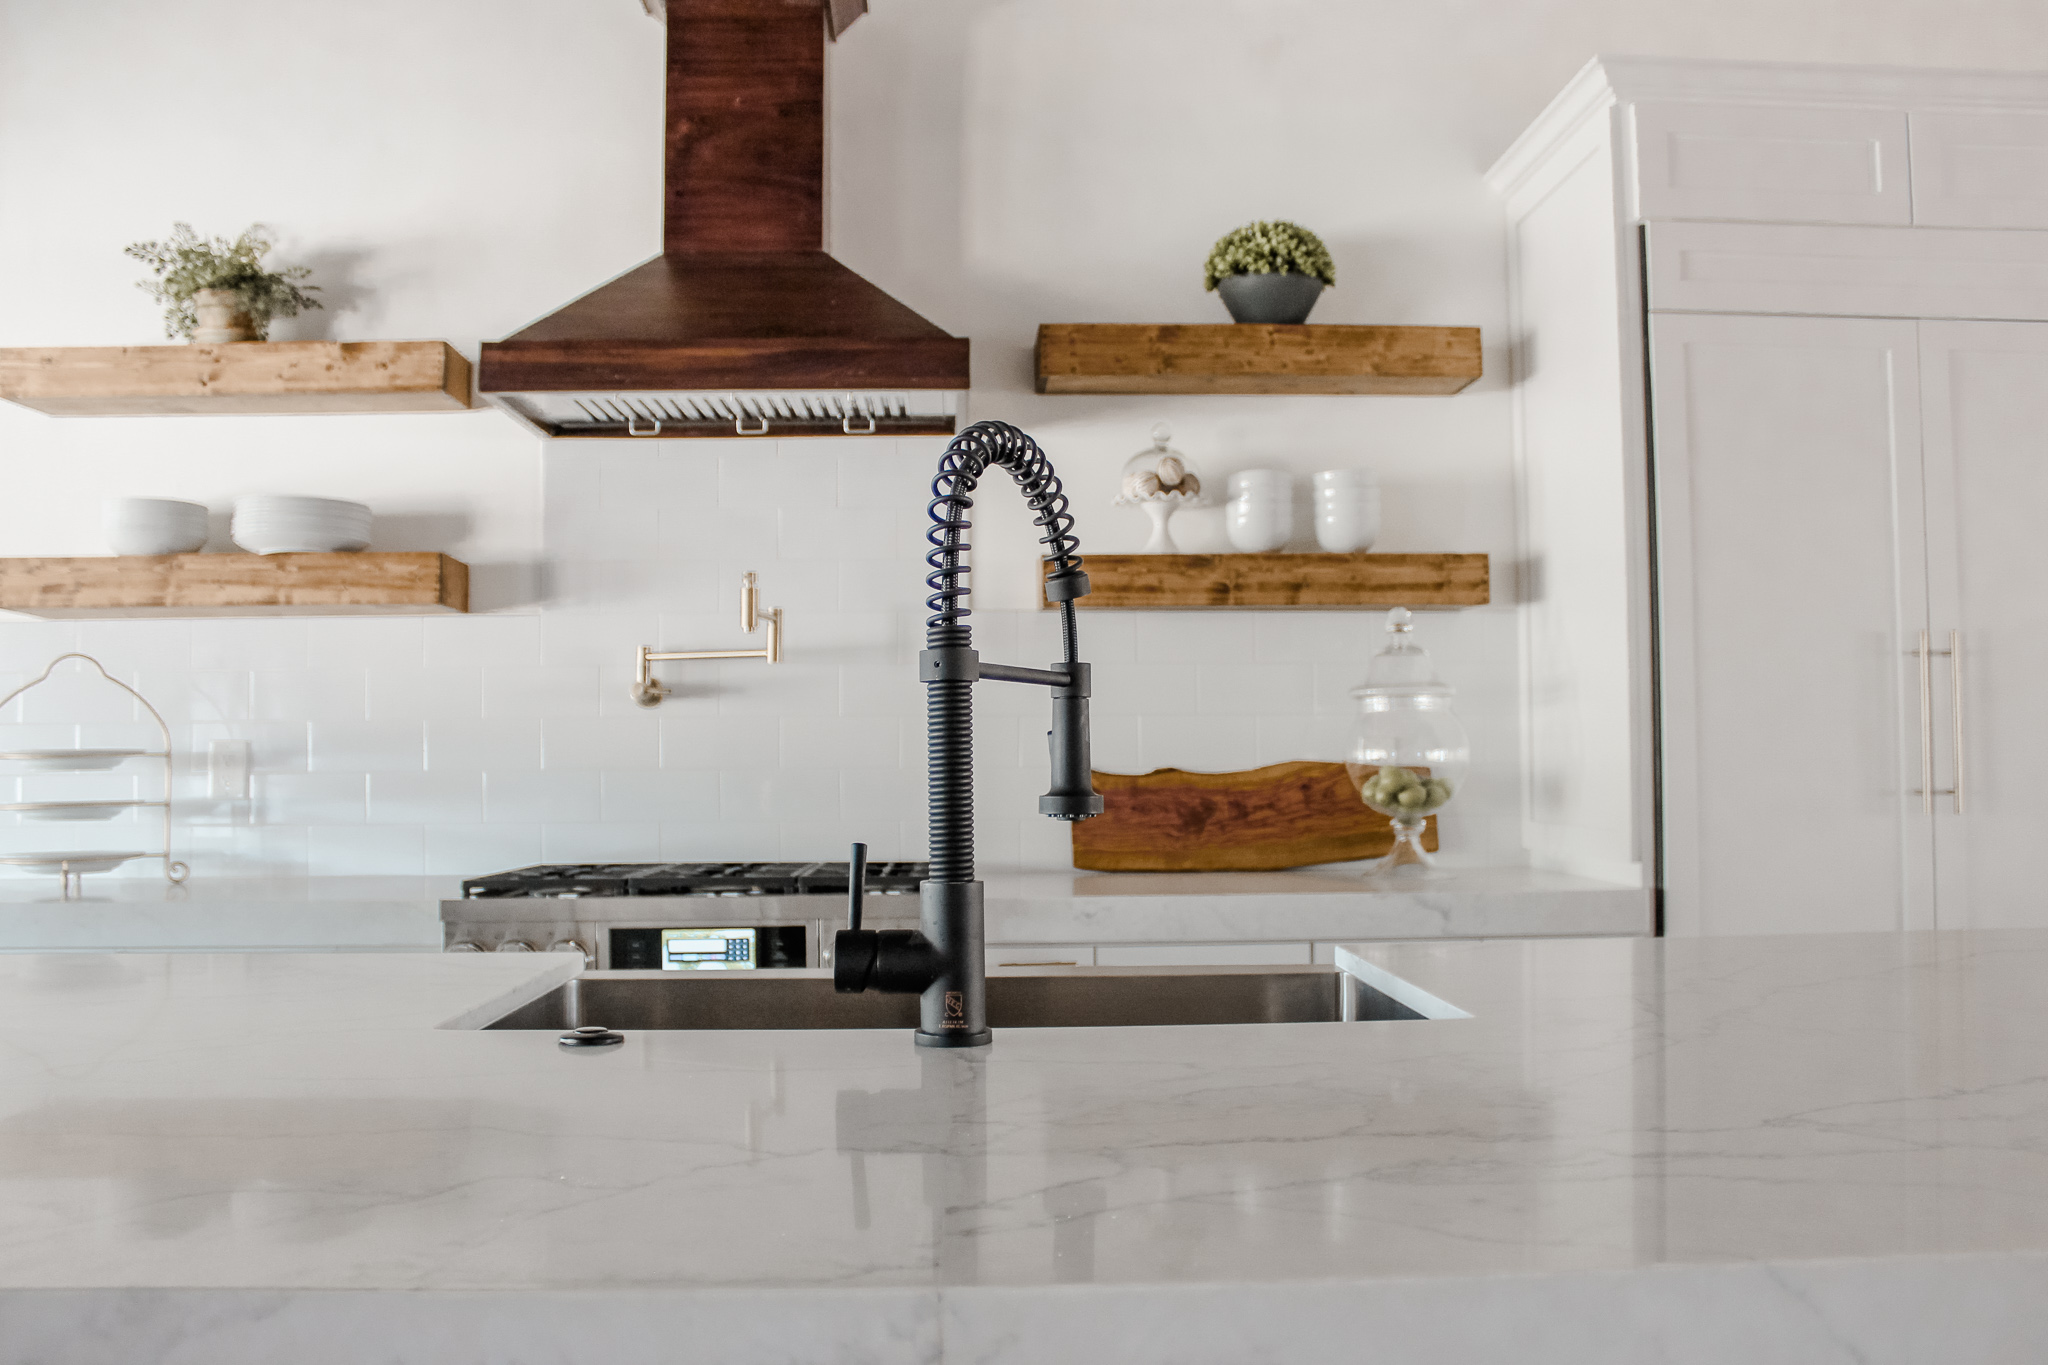  THE TOP 5 KITCHEN FAUCETS YOU NEED IN YOUR HOME TODAY! | VIGO Industries - Kitchen Design Ideas - Kitchen Remodels - Home Interior - Modern Kitchen Sinks and Faucets 